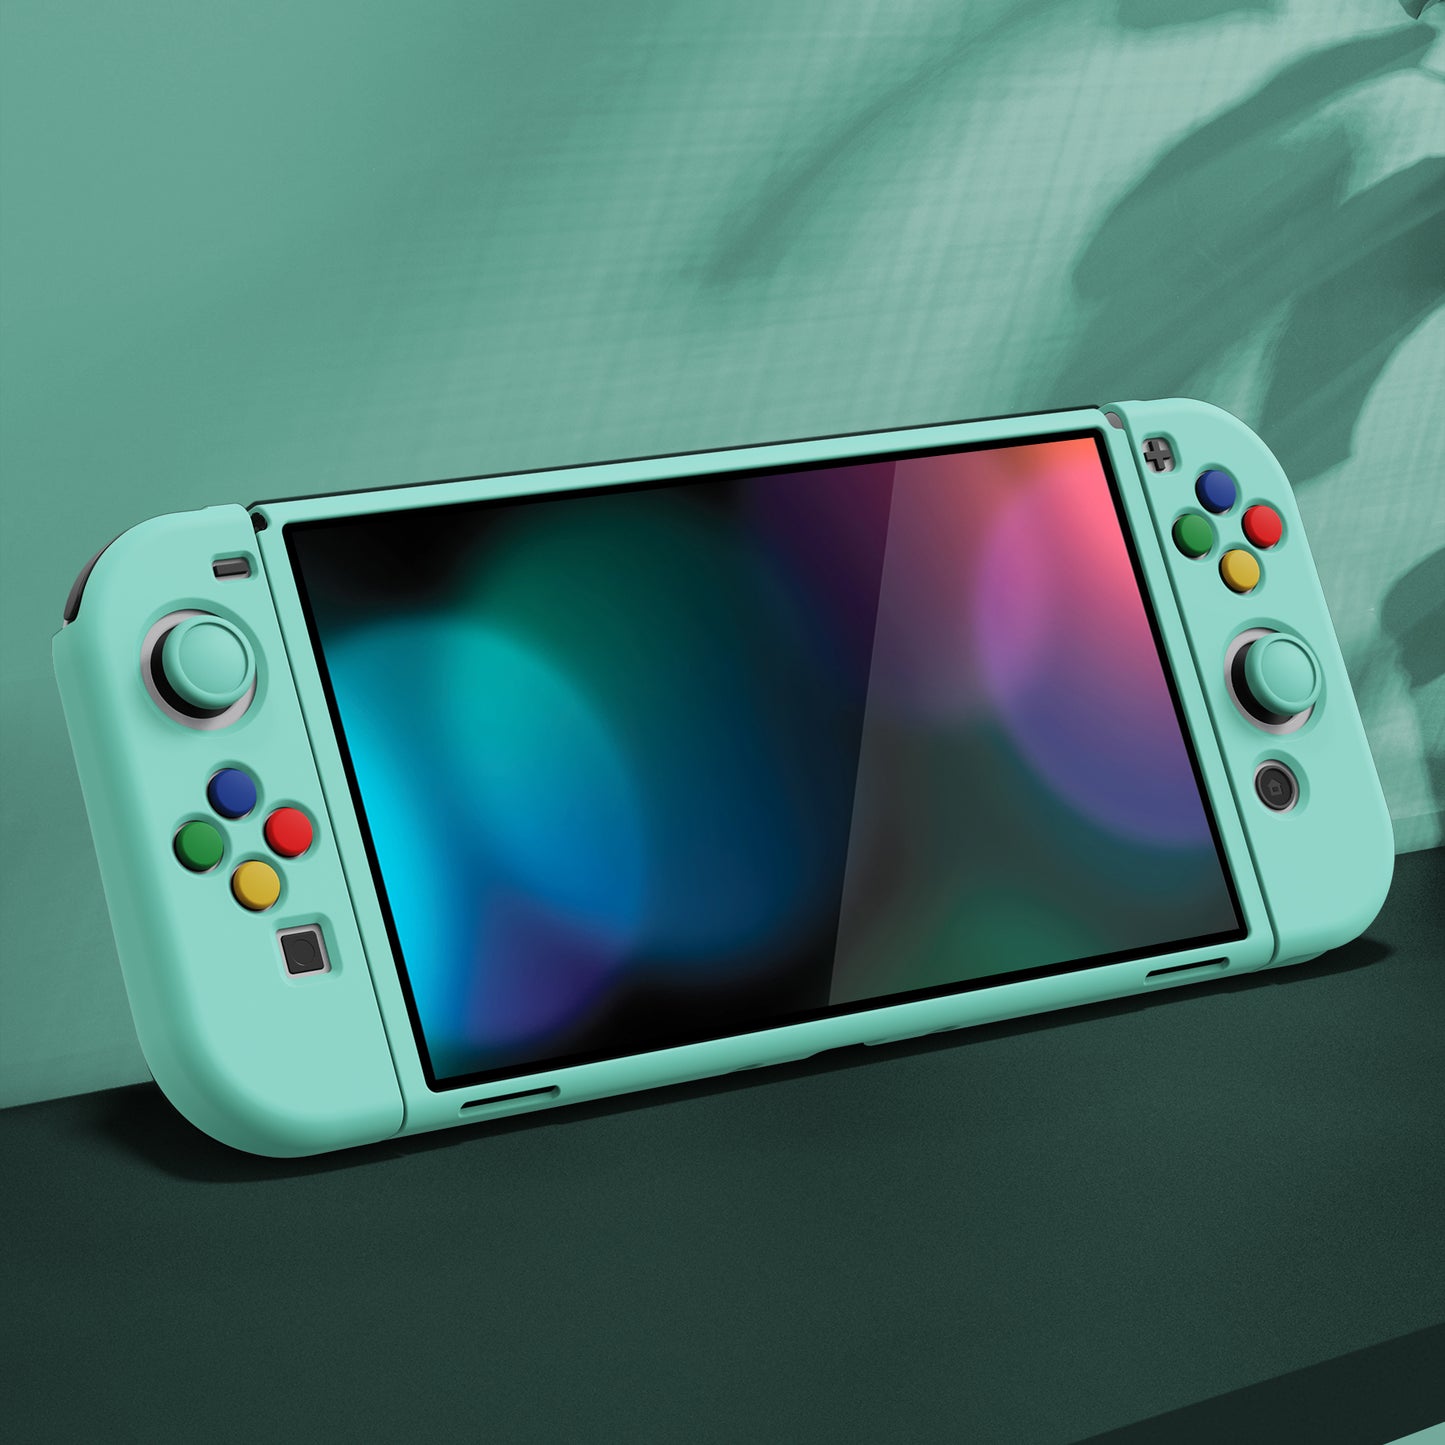 PlayVital ZealProtect Soft Protective Case for Switch OLED, Flexible Protector Joycon Grip Cover for Switch OLED with Thumb Grip Caps & ABXY Direction Button Caps - Misty Green - XSOYM5004 playvital